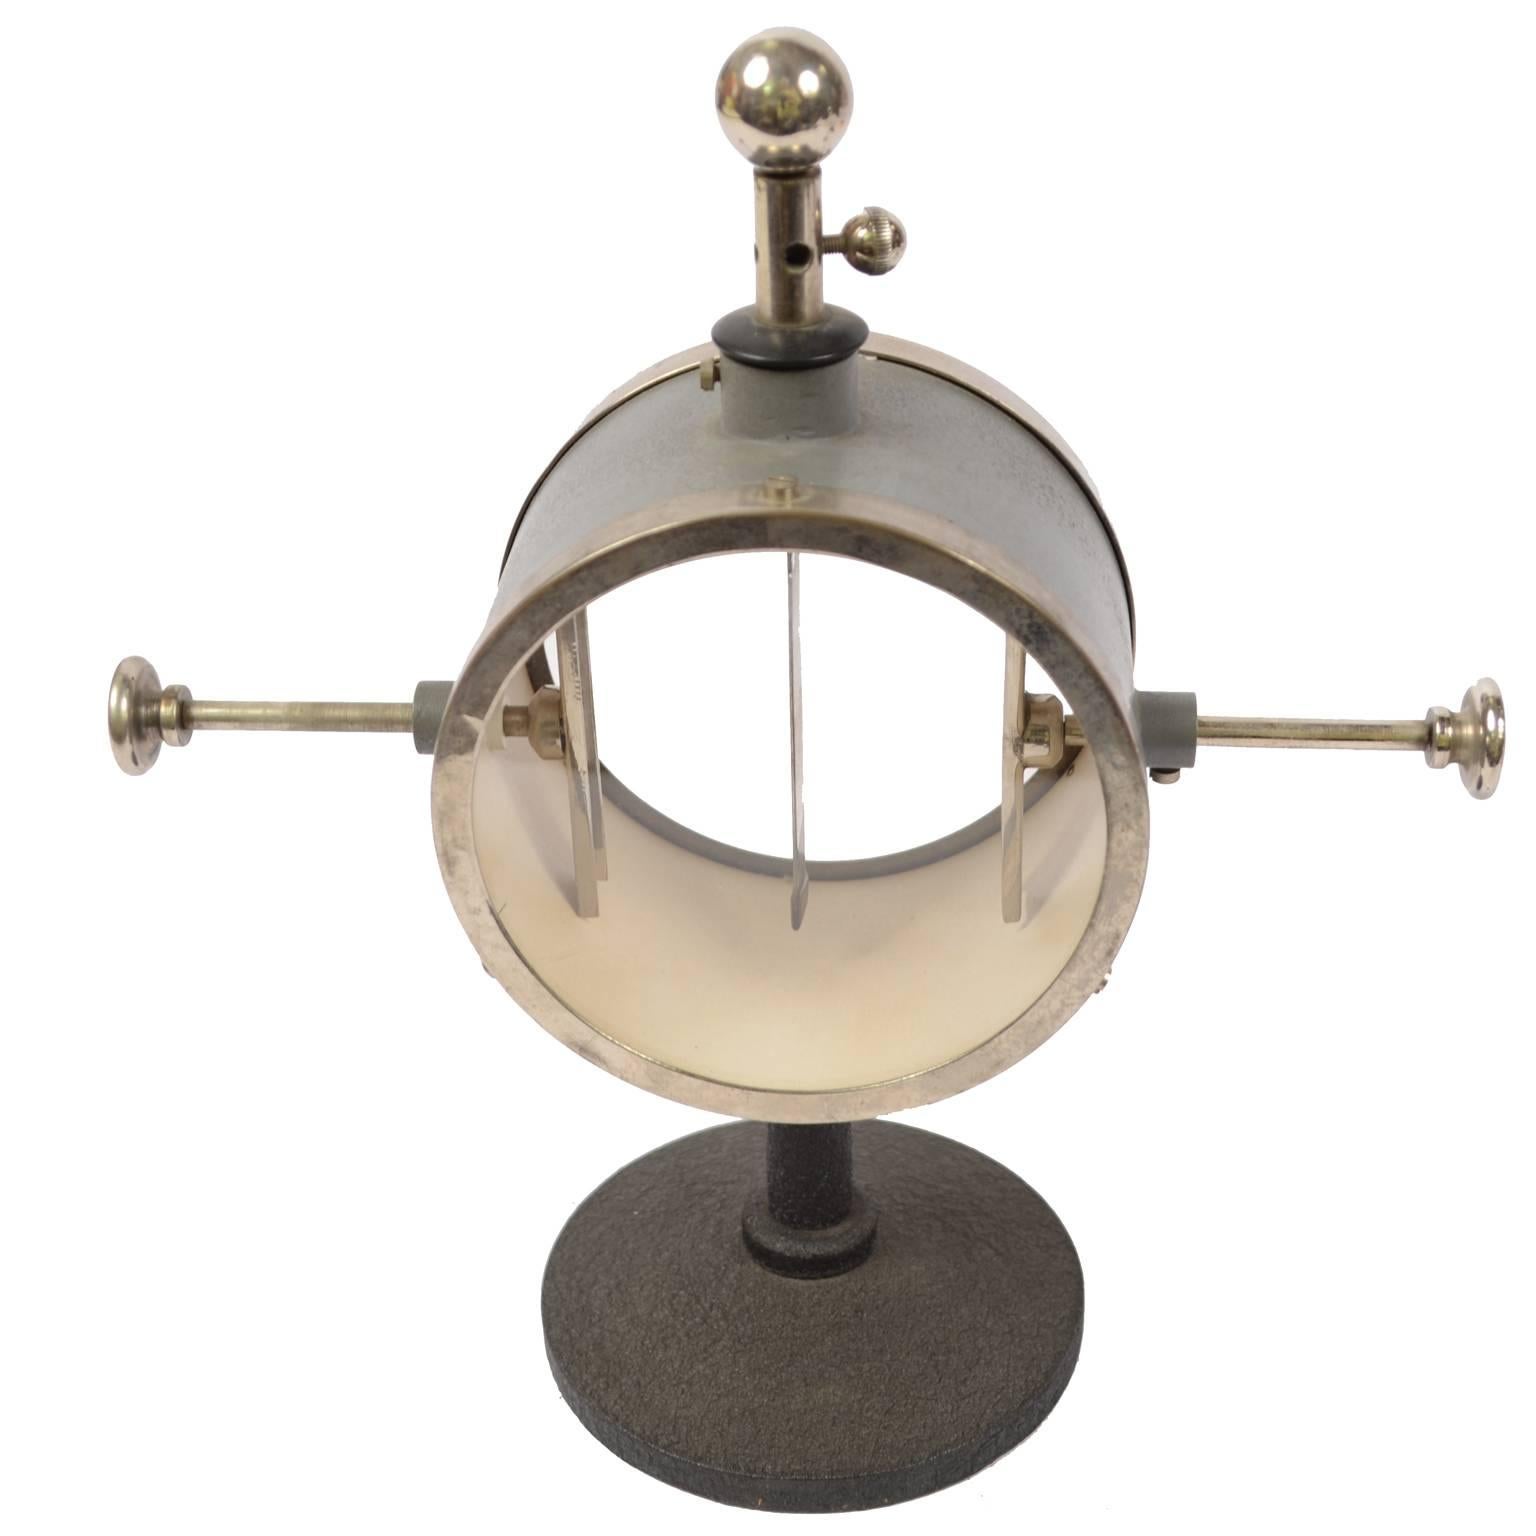 20th Century Silver-Leafed Condenser Electroscope Made in the Early 1900s